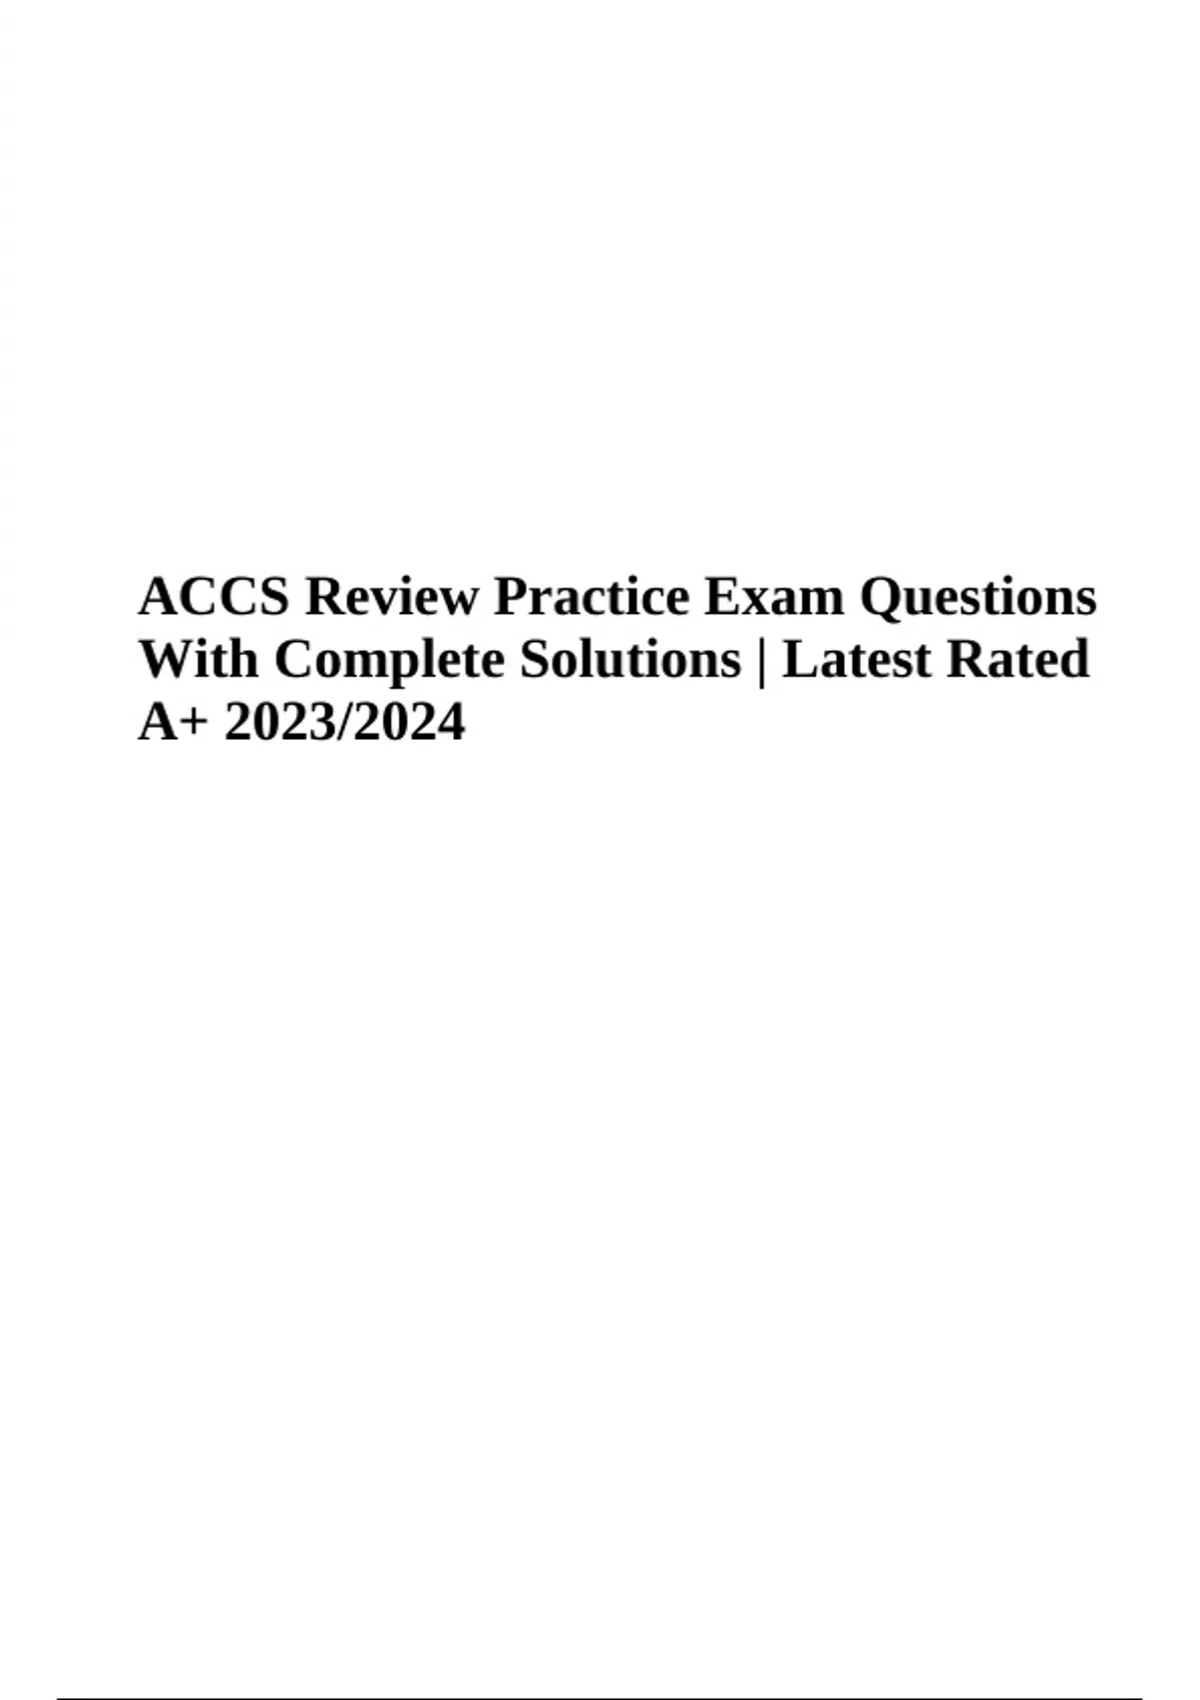 ACCS Exam Practice Questions With Correct Solutions Latest Rated A+